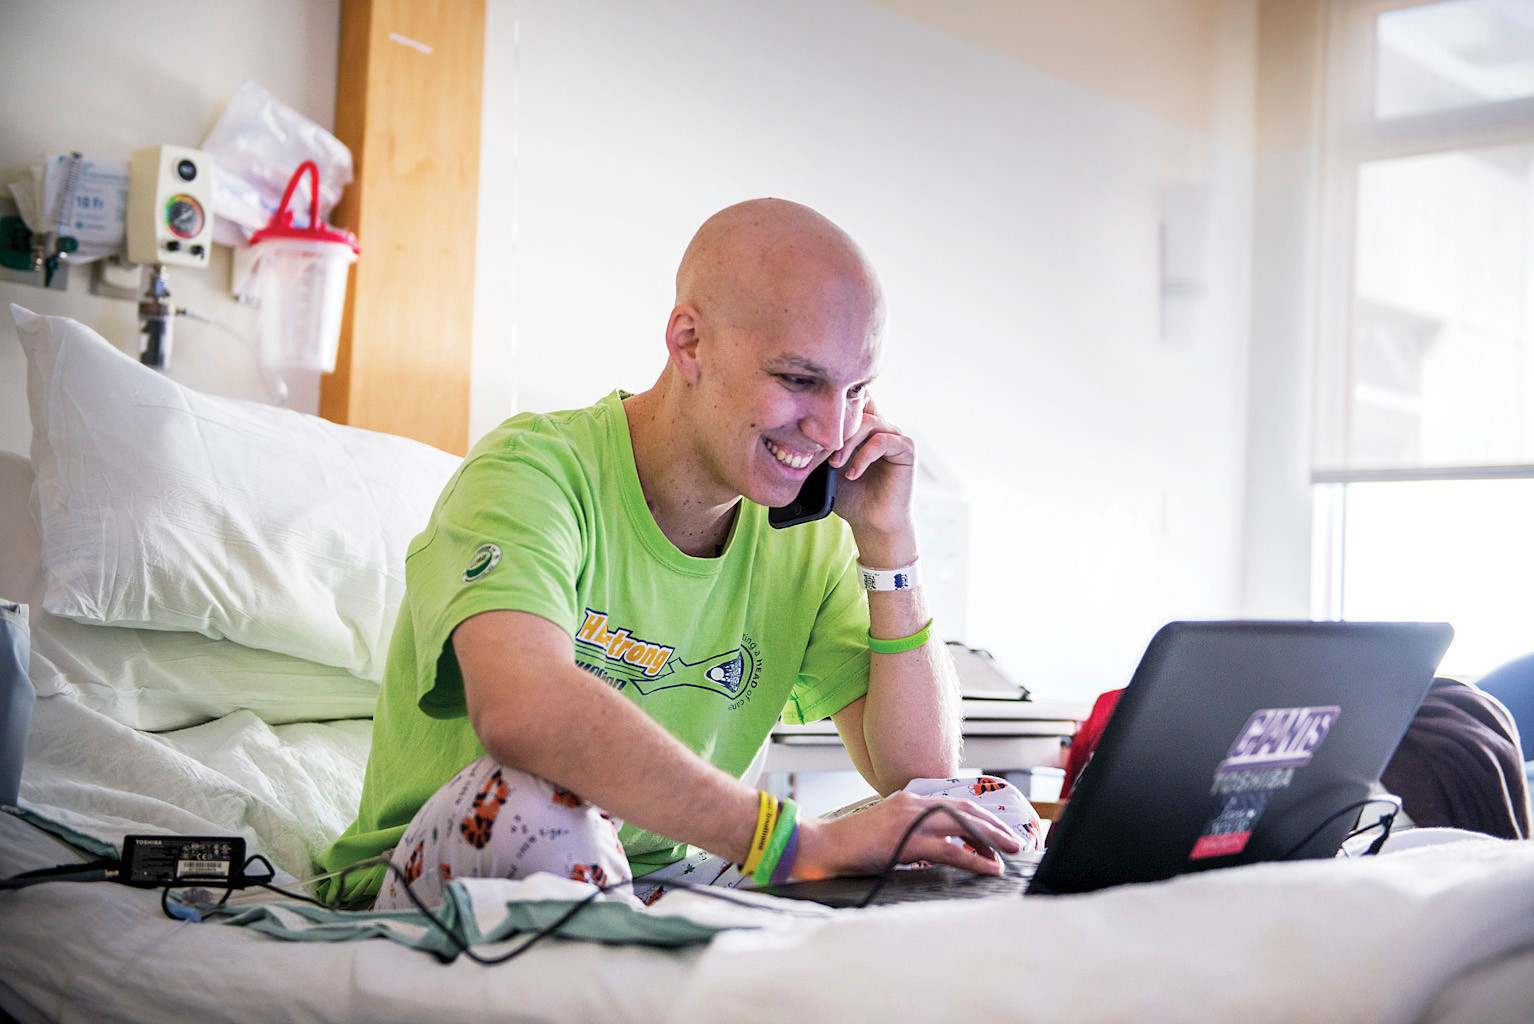 Manhattan College sports announcer Christian Heimall, 25, sits in his room in the children's wing of the Westchester Medical Center on Monday. A cancer patient, he is due to be released on April 7, after four months of treatment.